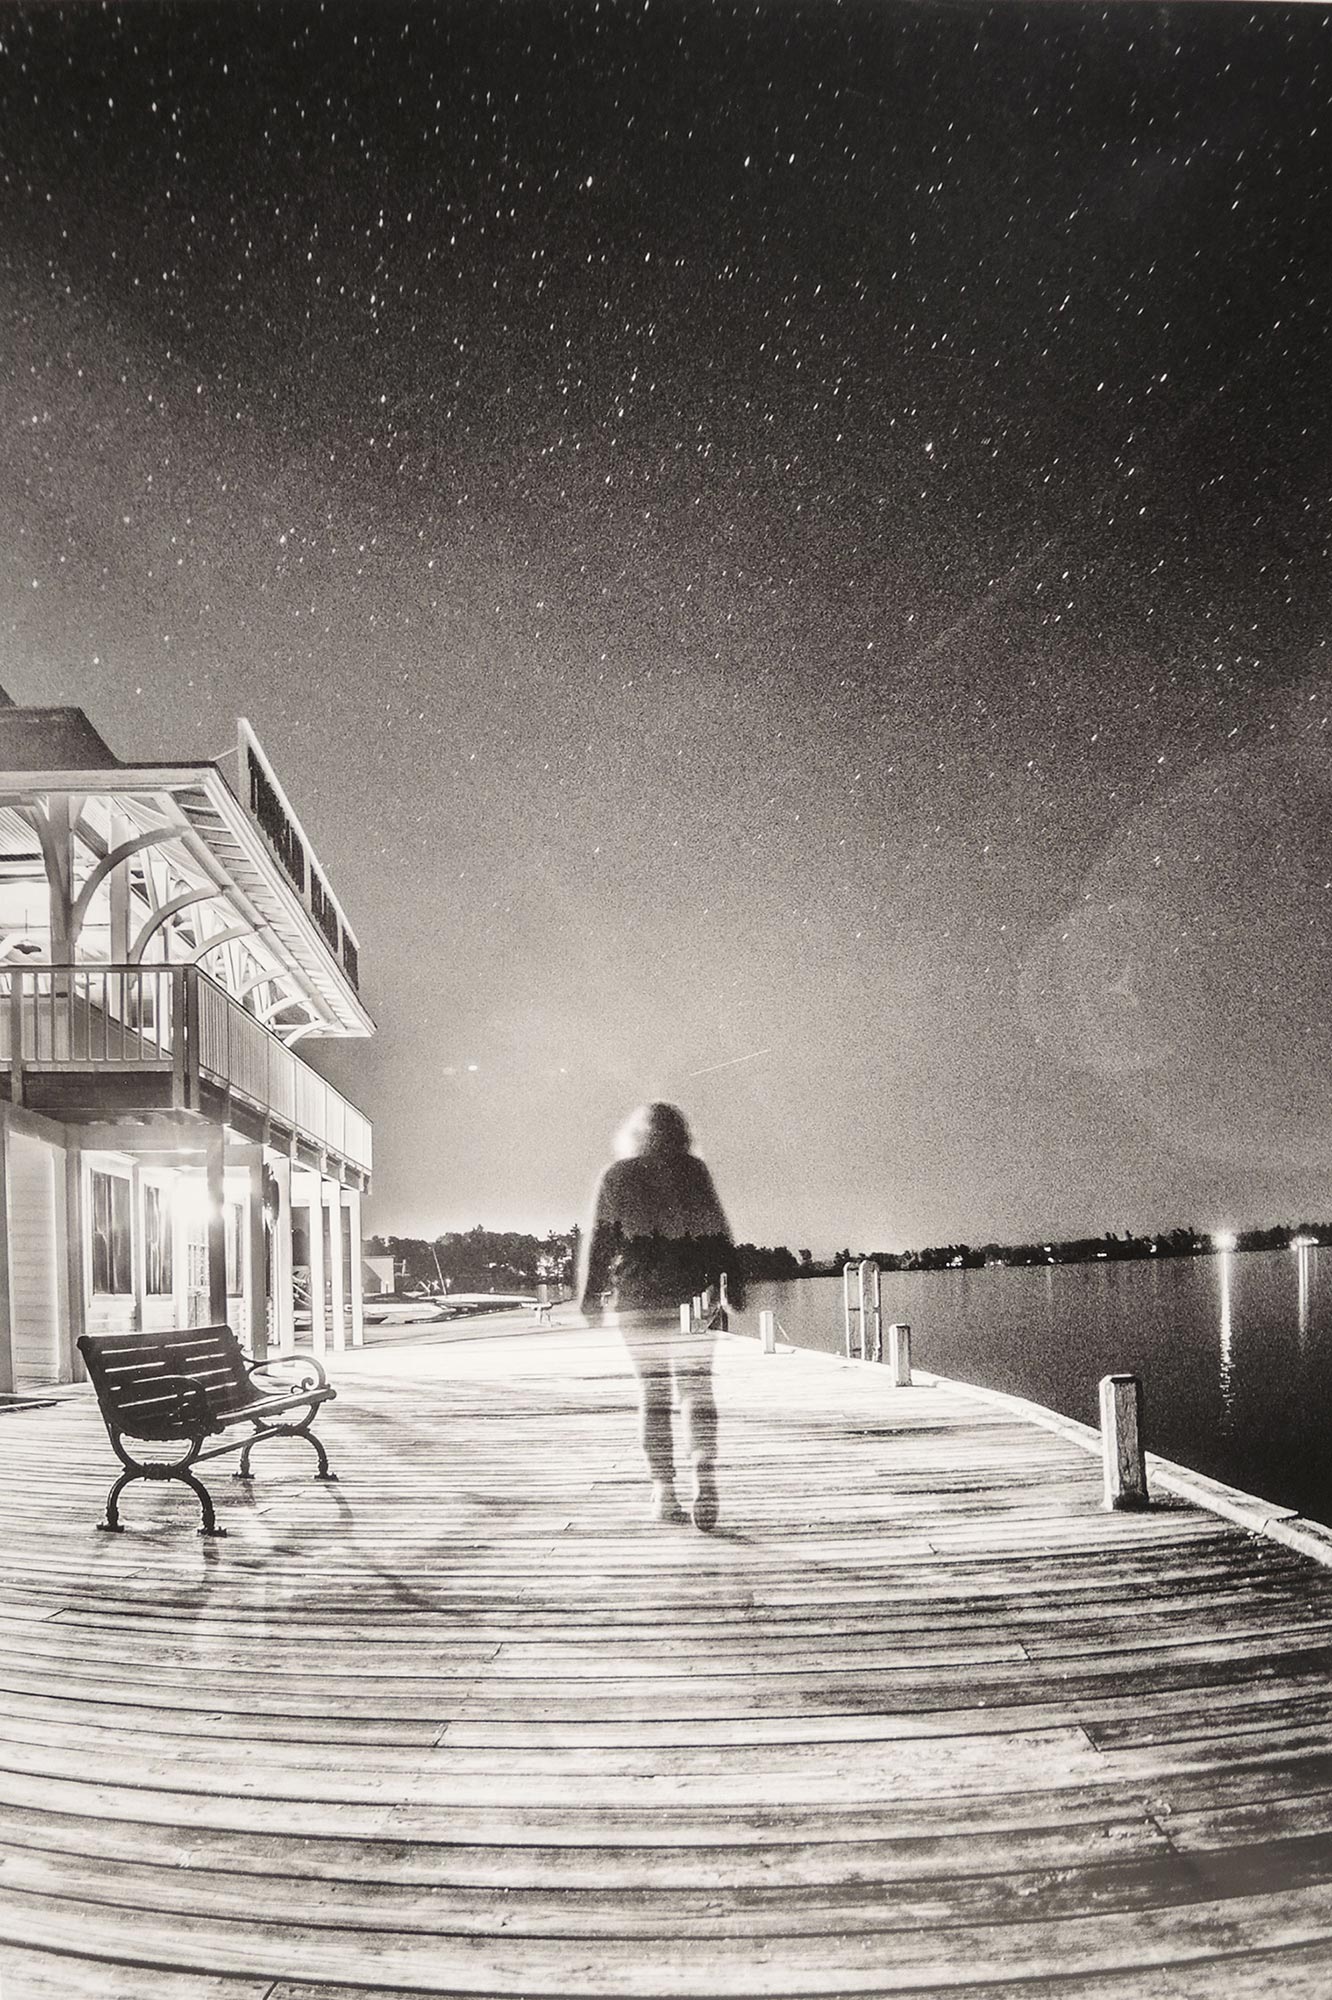 A photograph by Gabrielle Robinson of a person walking away from the camera on a starry night